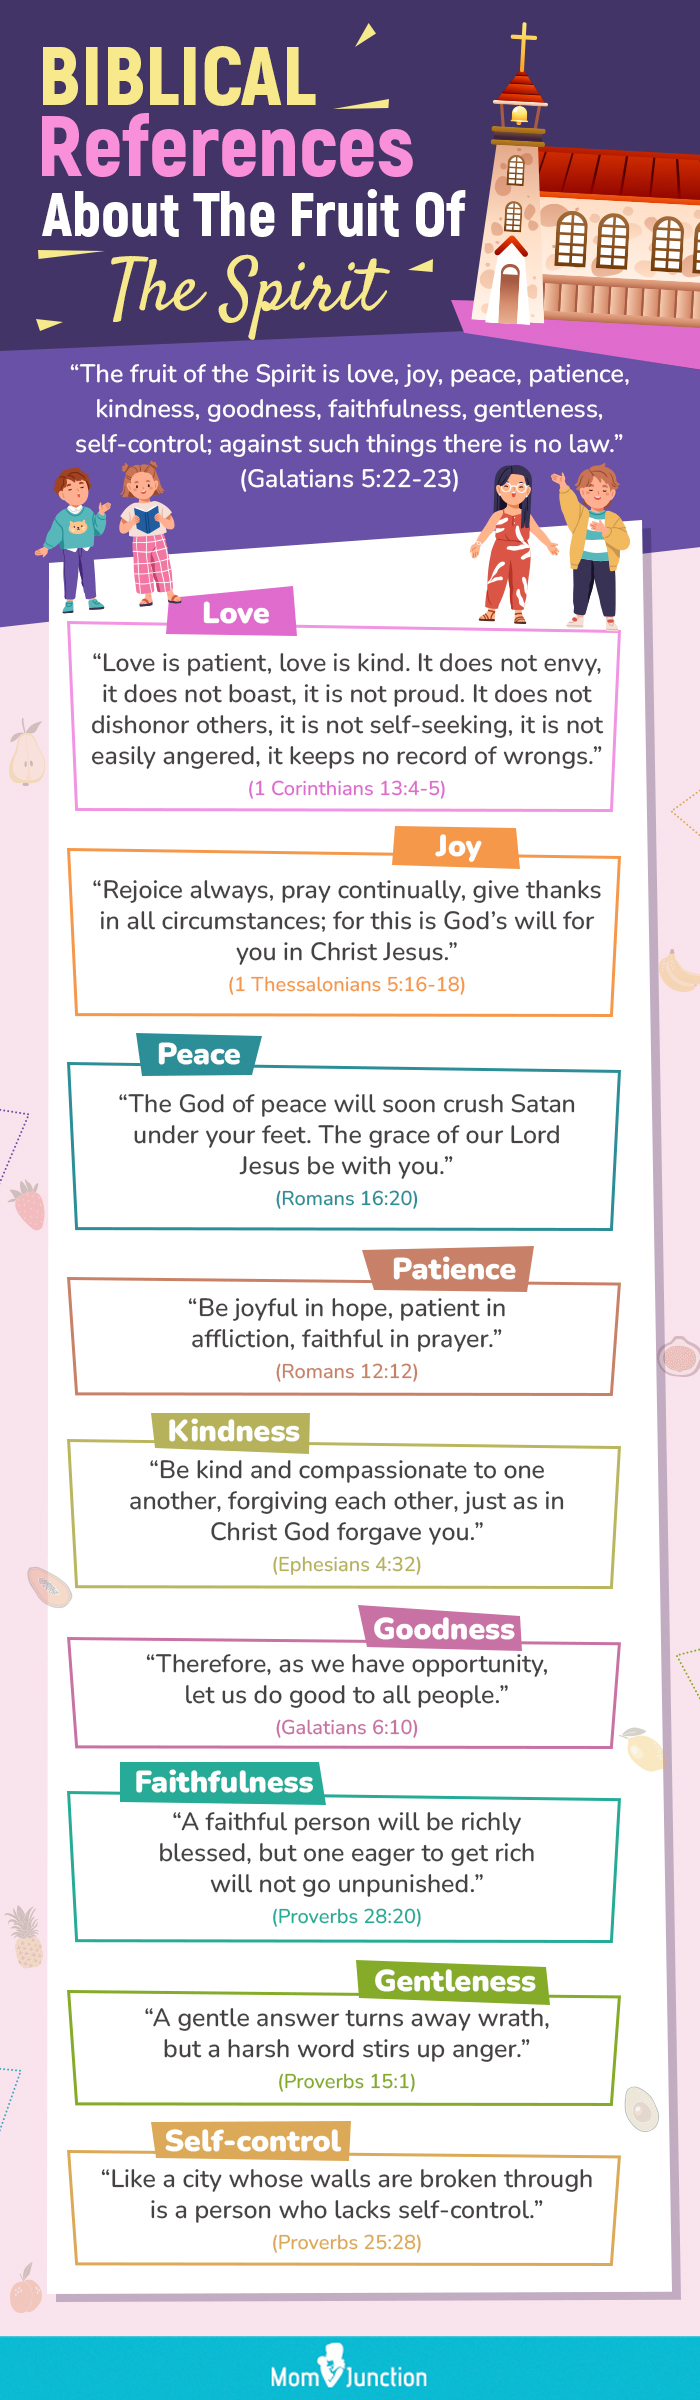 fruits of spirit and their meaning from the bible (infographic)